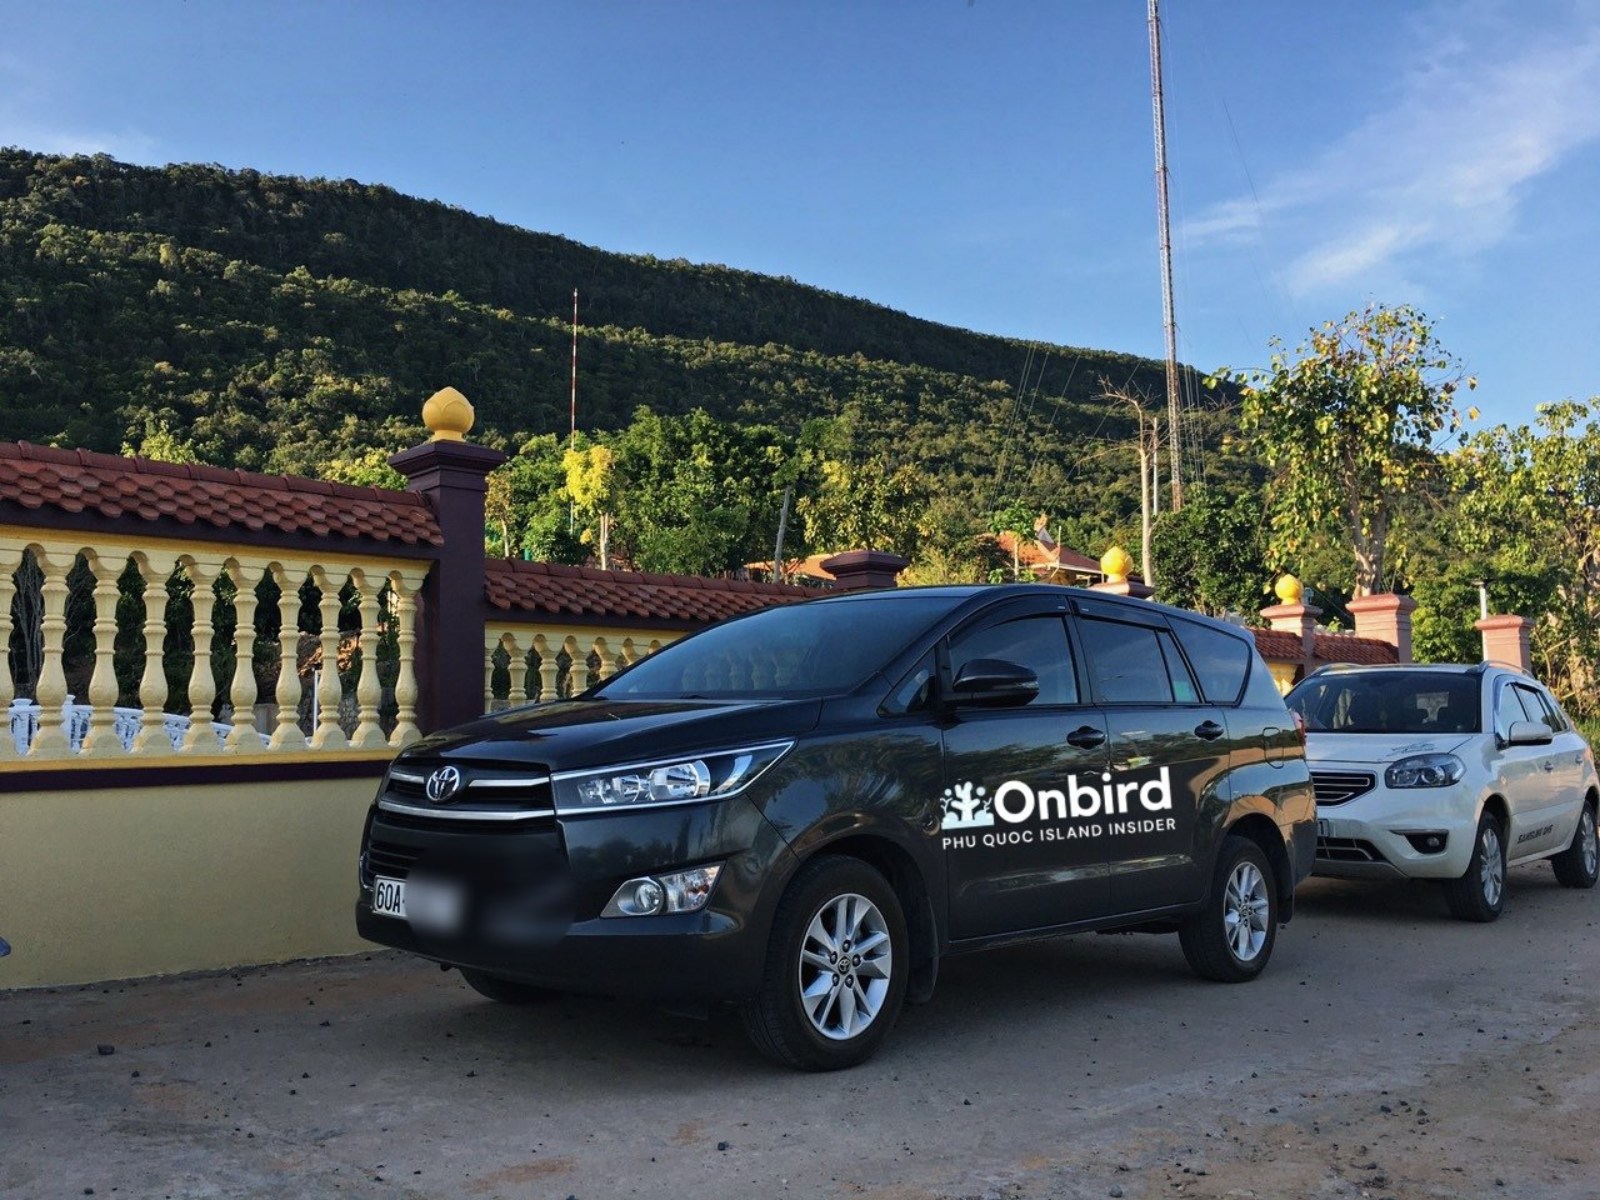 7 SEATER PRIVATE CAR RENTAL - TAILOR-MADE ITINERARY VISIT THE SOUTH PHU  QUOC - OnBird | Phu Quoc Soft-adventure Journeys